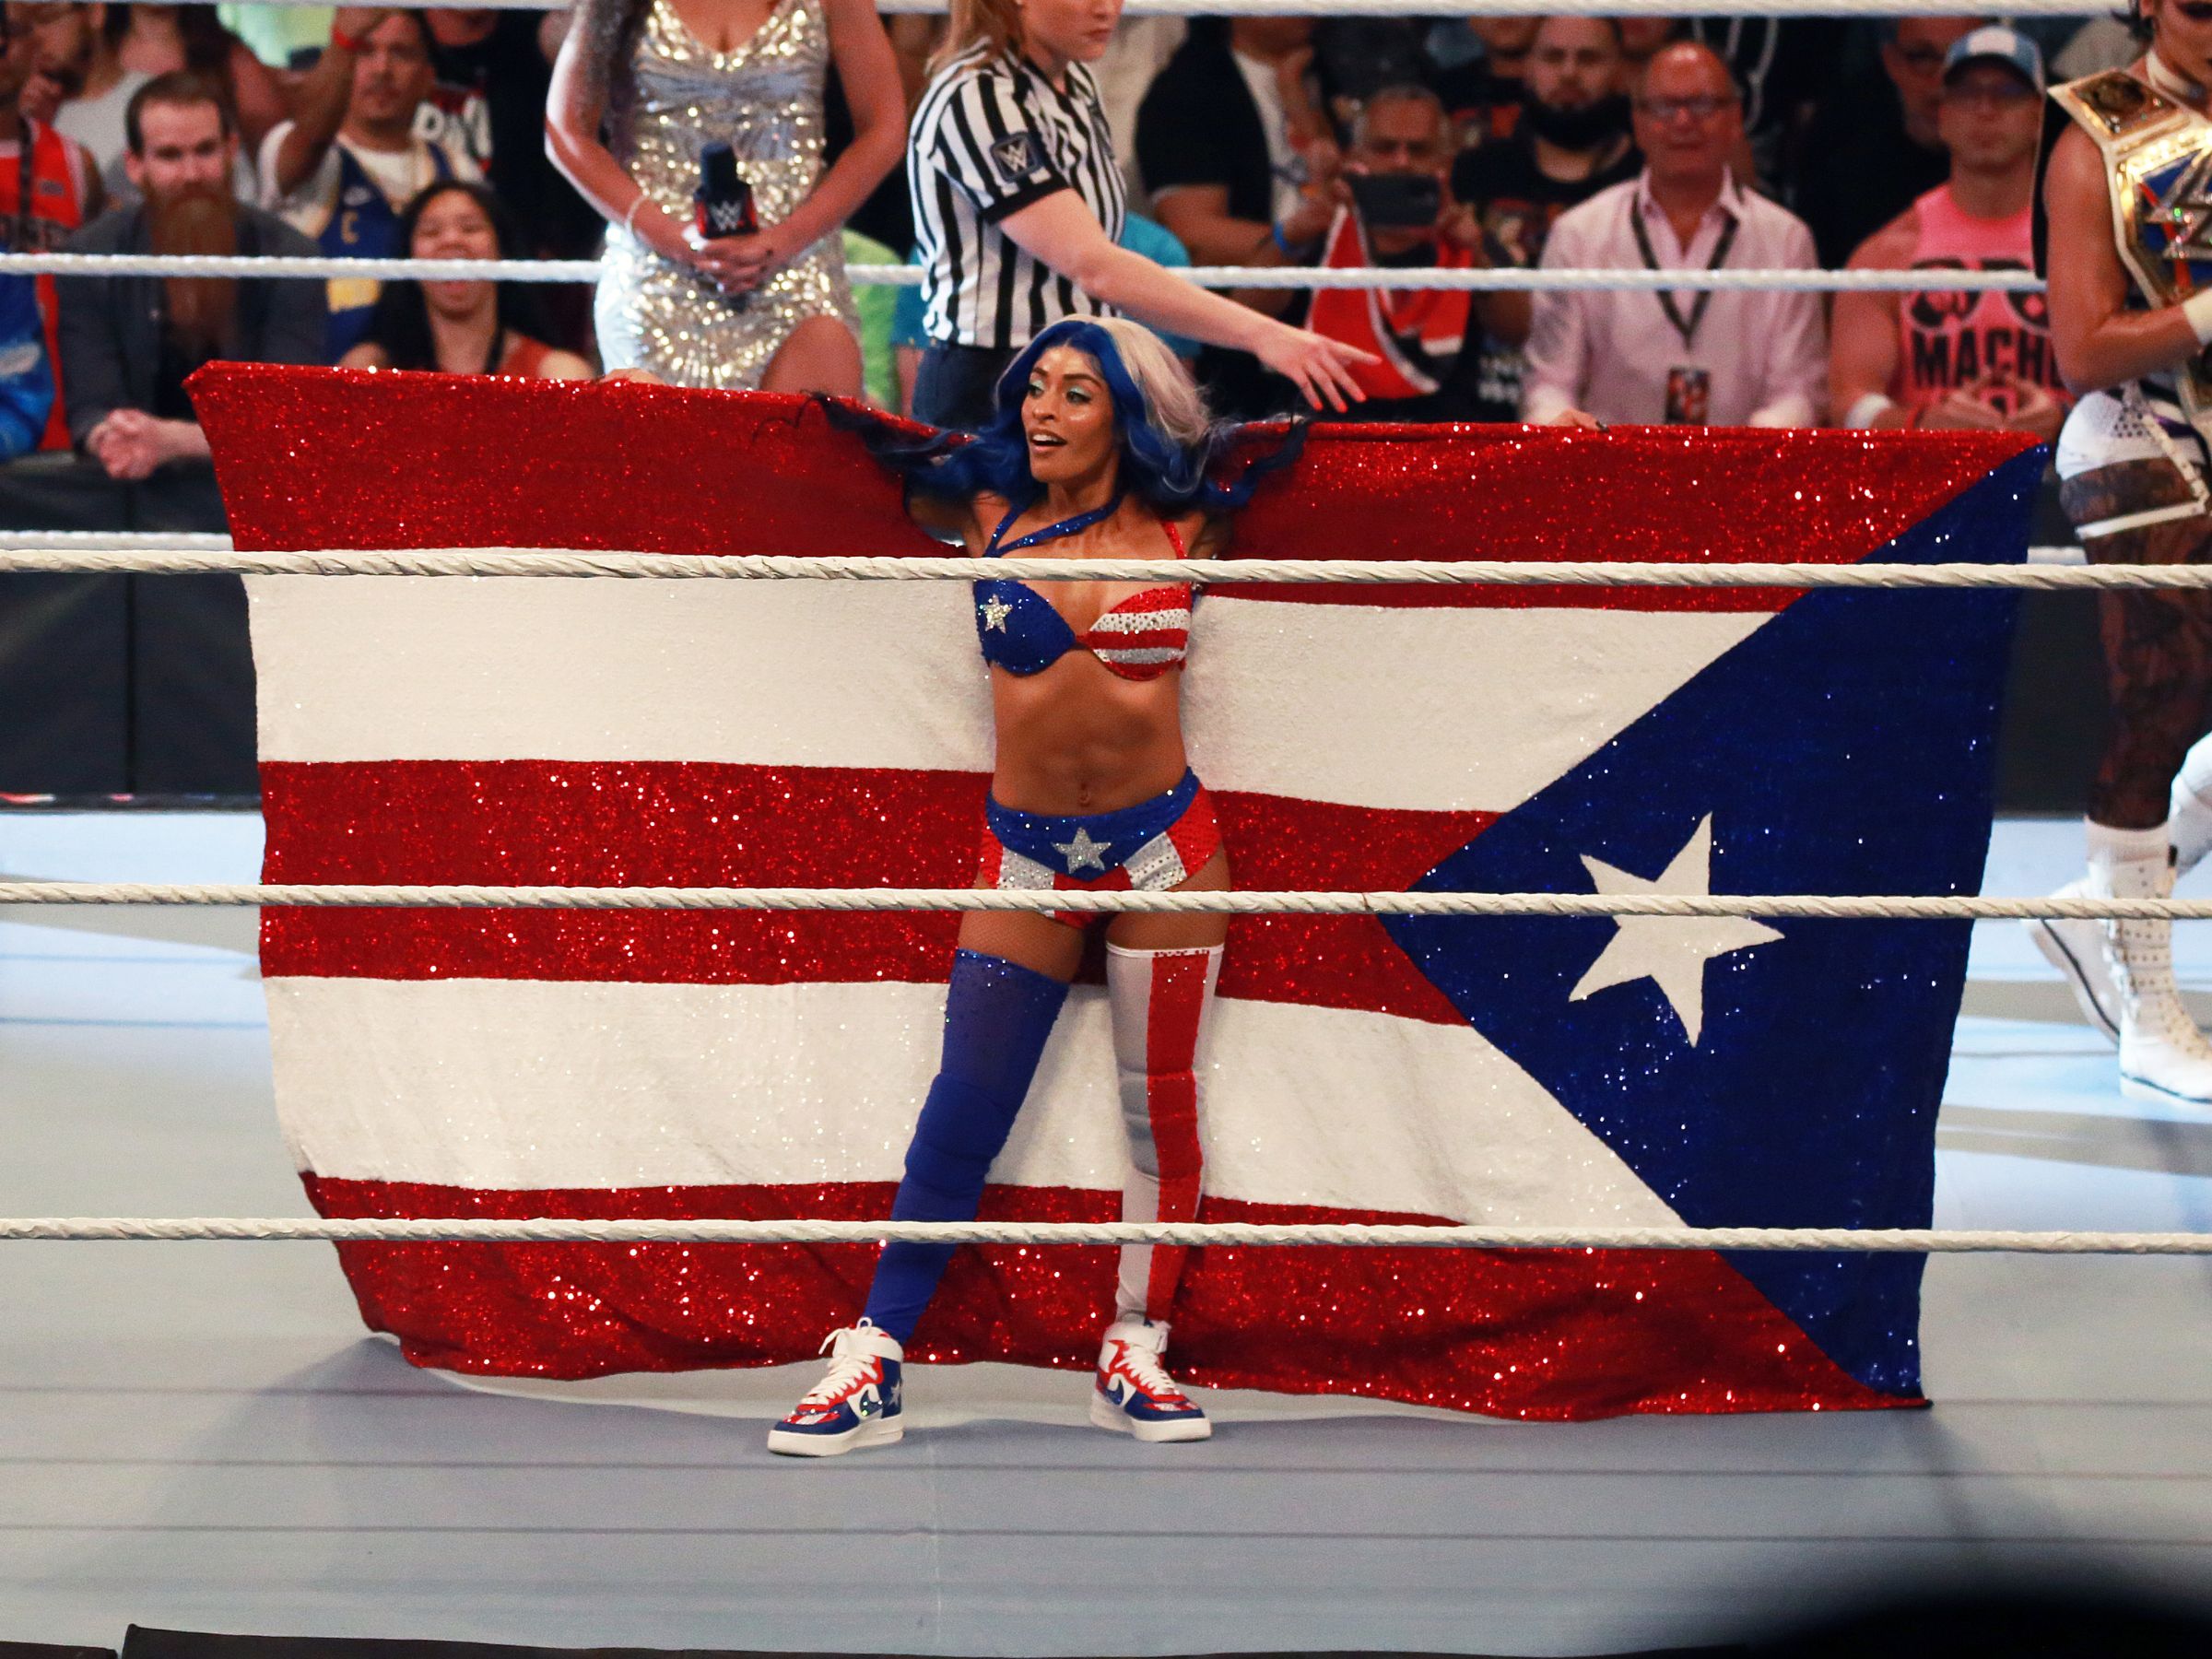 WATCH Zelina Vega Was Star of the Night at WWE Backlash in Puerto Rico